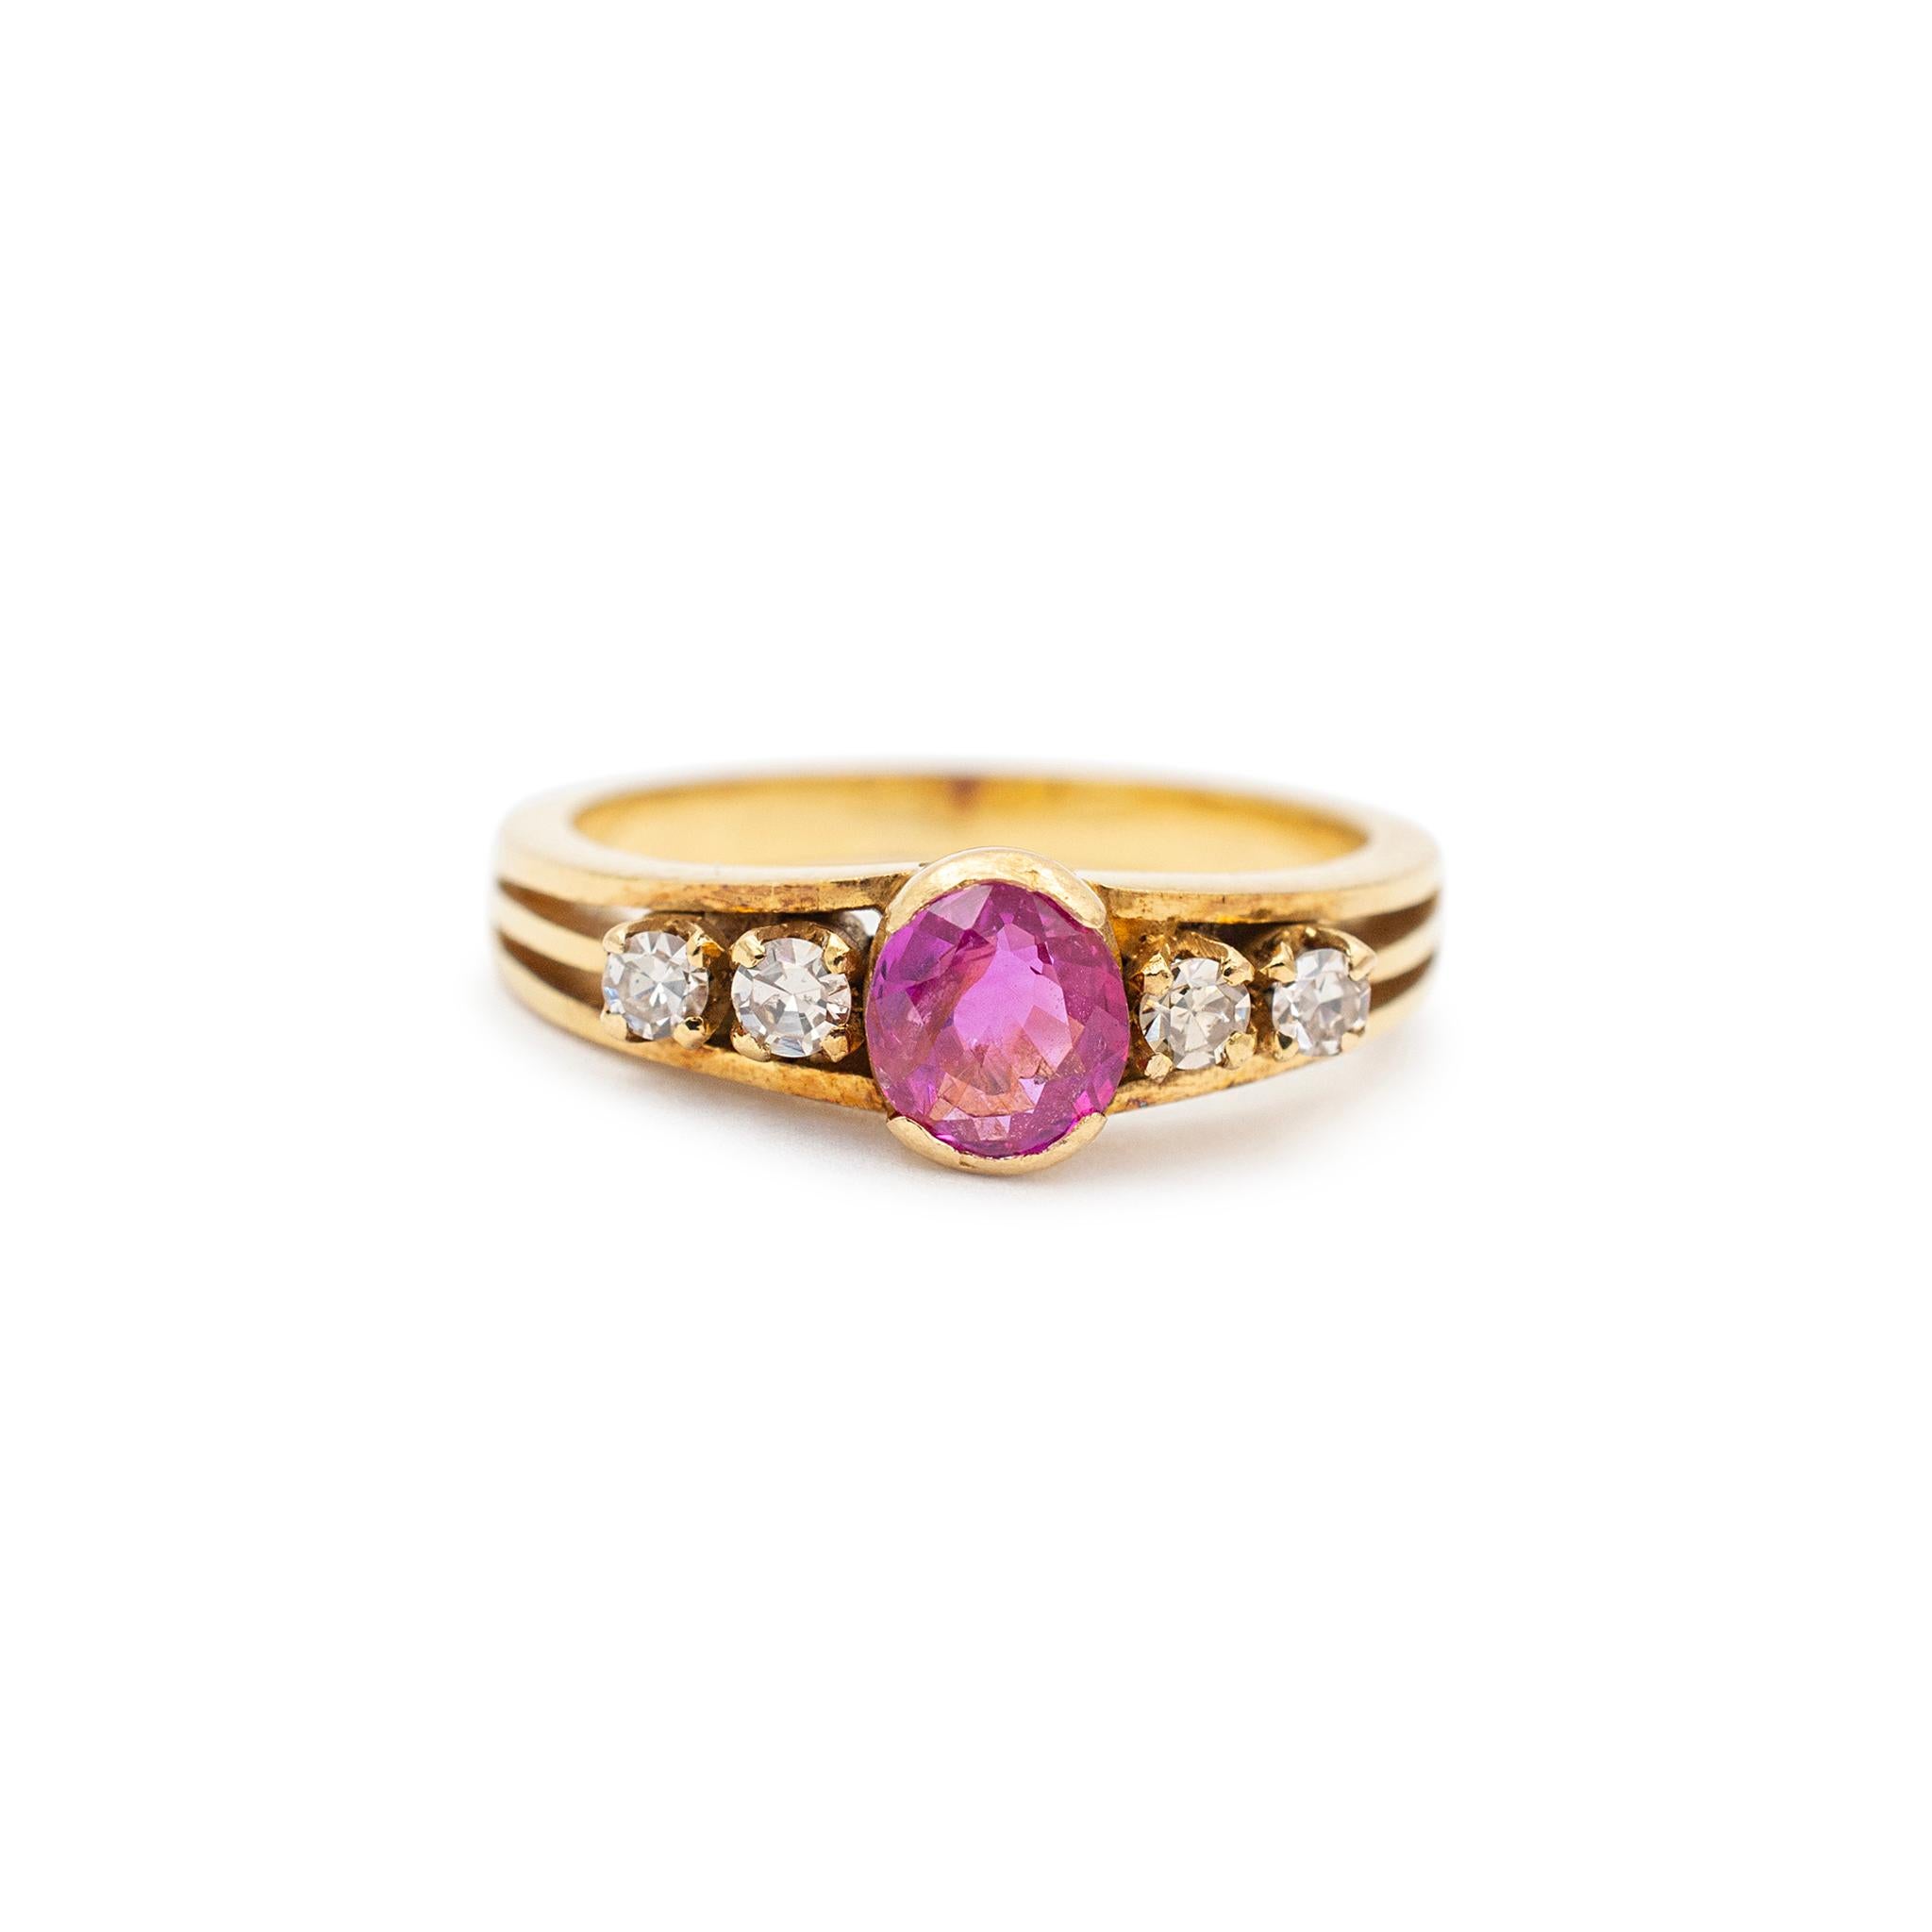 Gender: Ladies

Metal Type: Yellow Gold

Ring Size: 3.25

Width: Approximately 5.50 mm tapering to 1.95 mm

Weight: 2.70 grams

One ladies custom-made polished 18K yellow gold, diamond, and pink sapphire vintage cocktail ring with a half-round